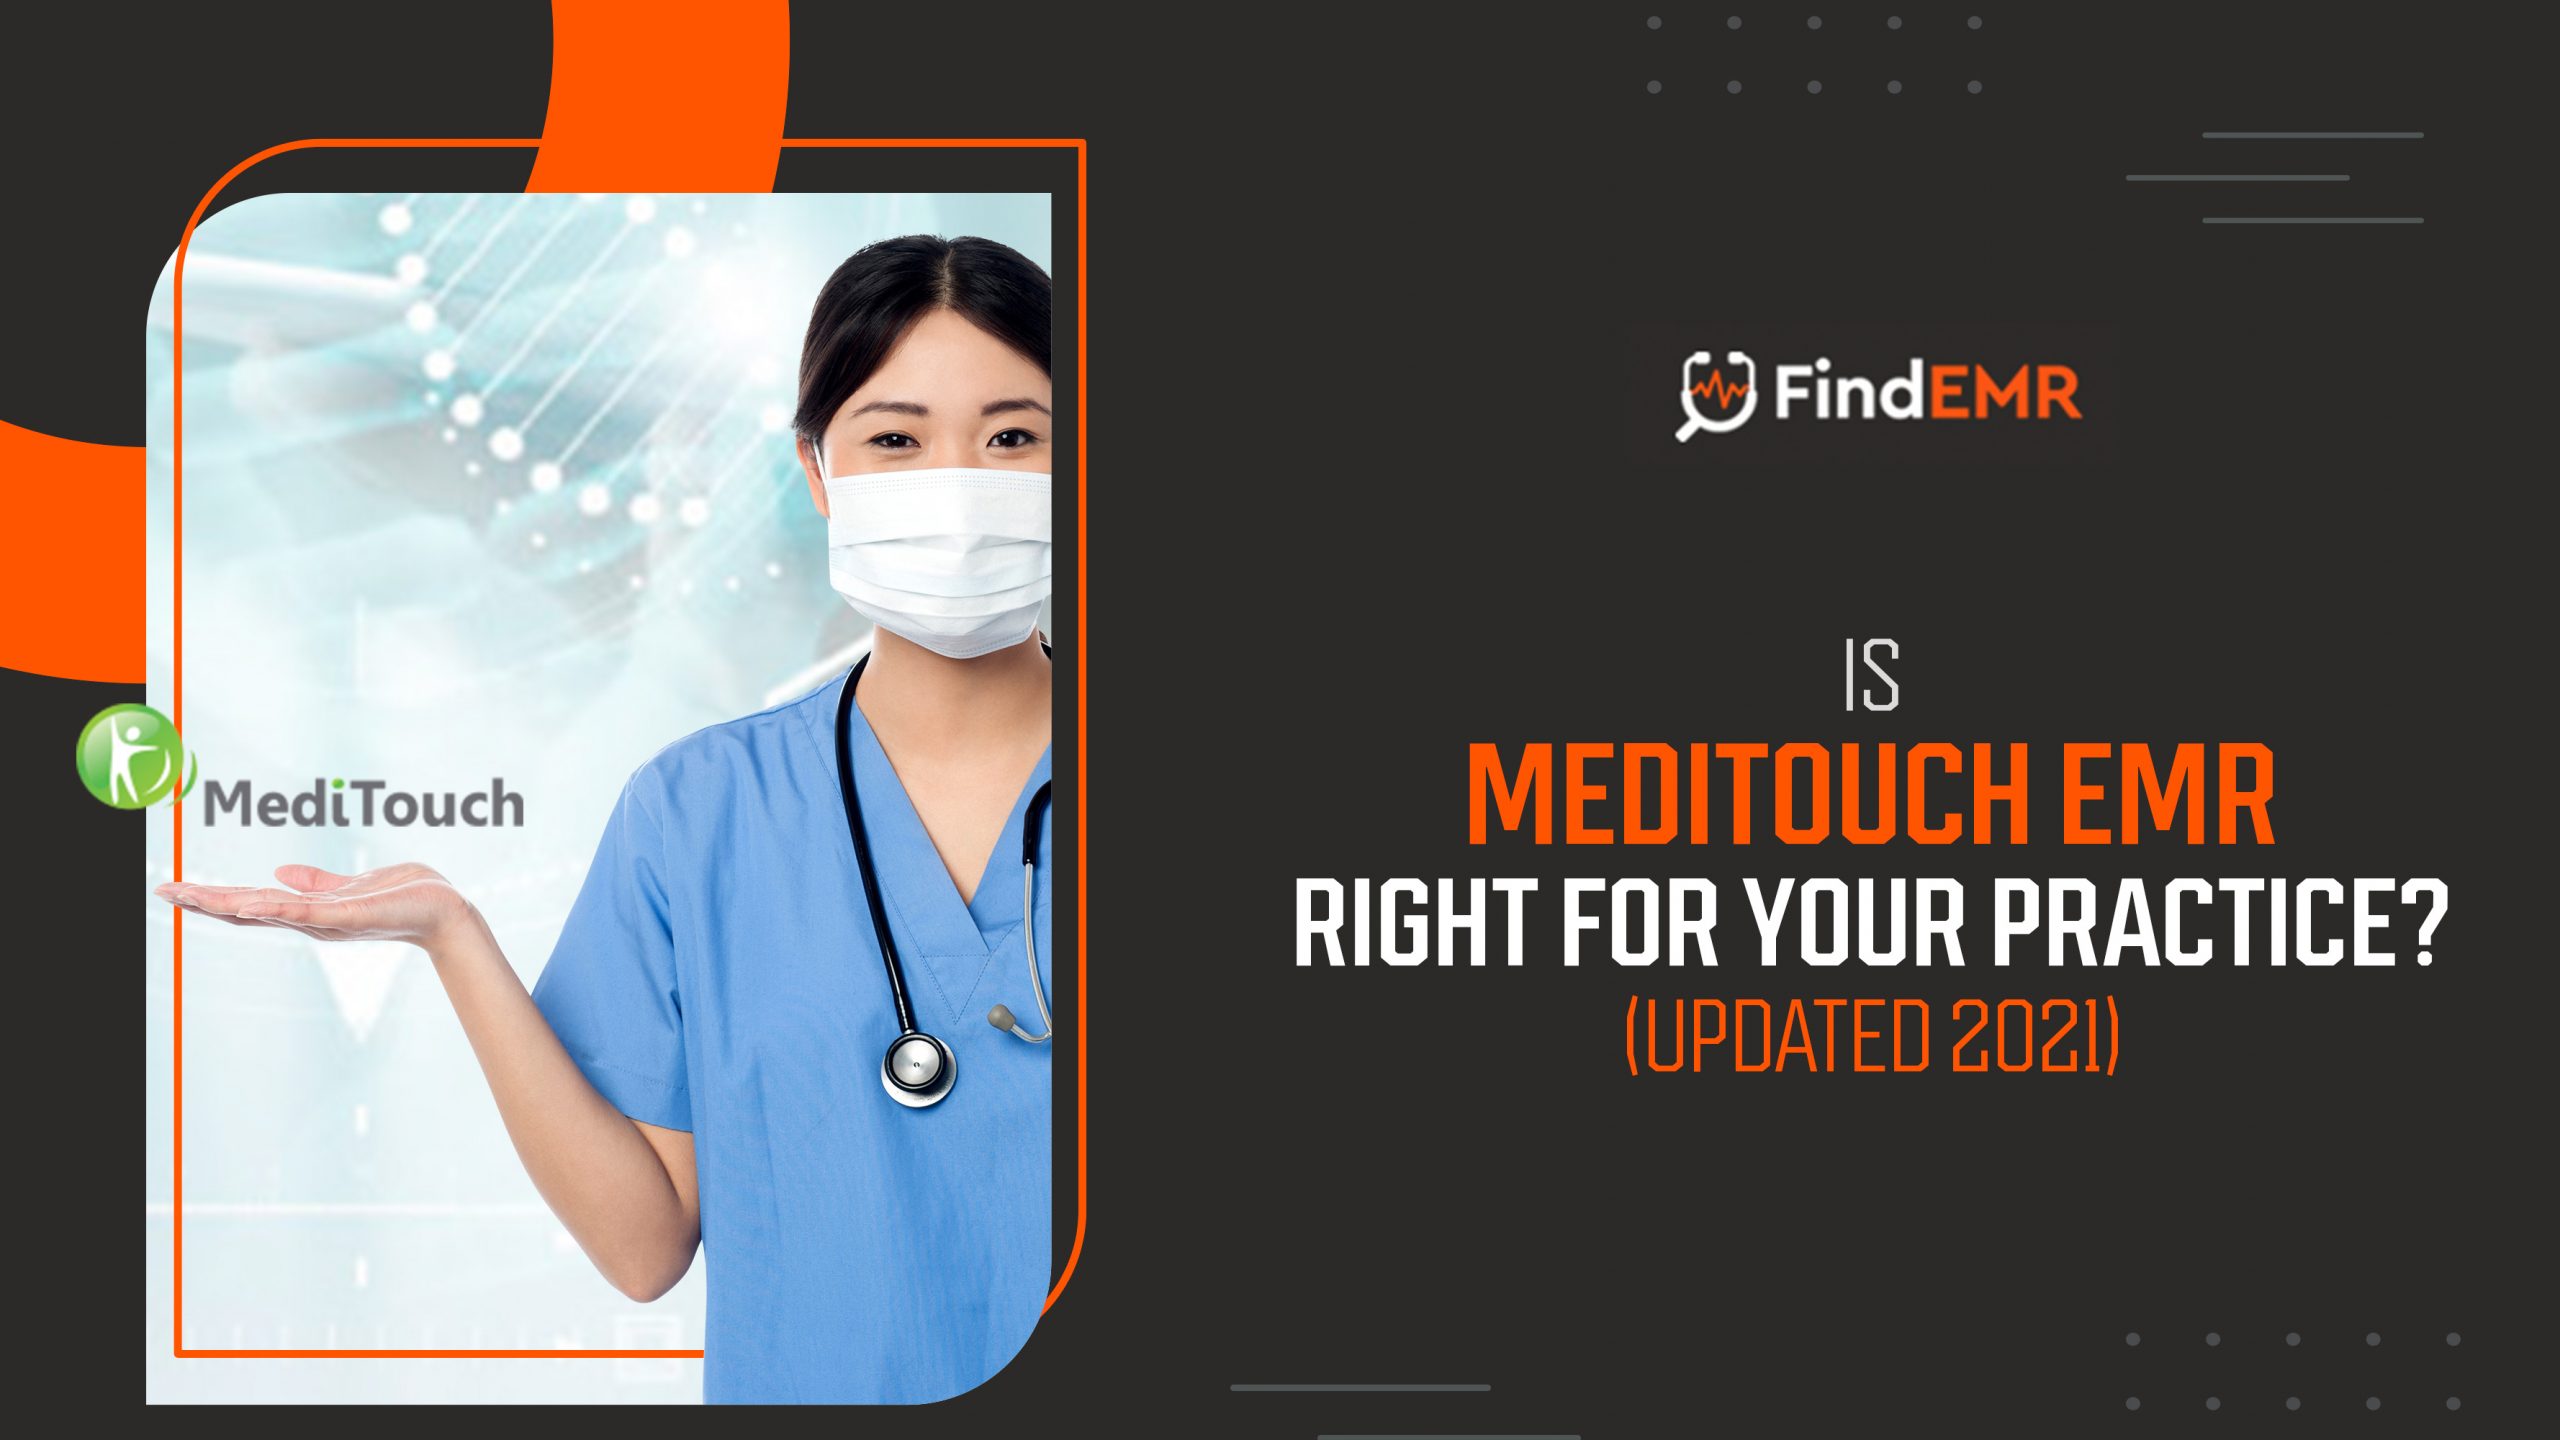 Is Meditouch EMR right for your practice?